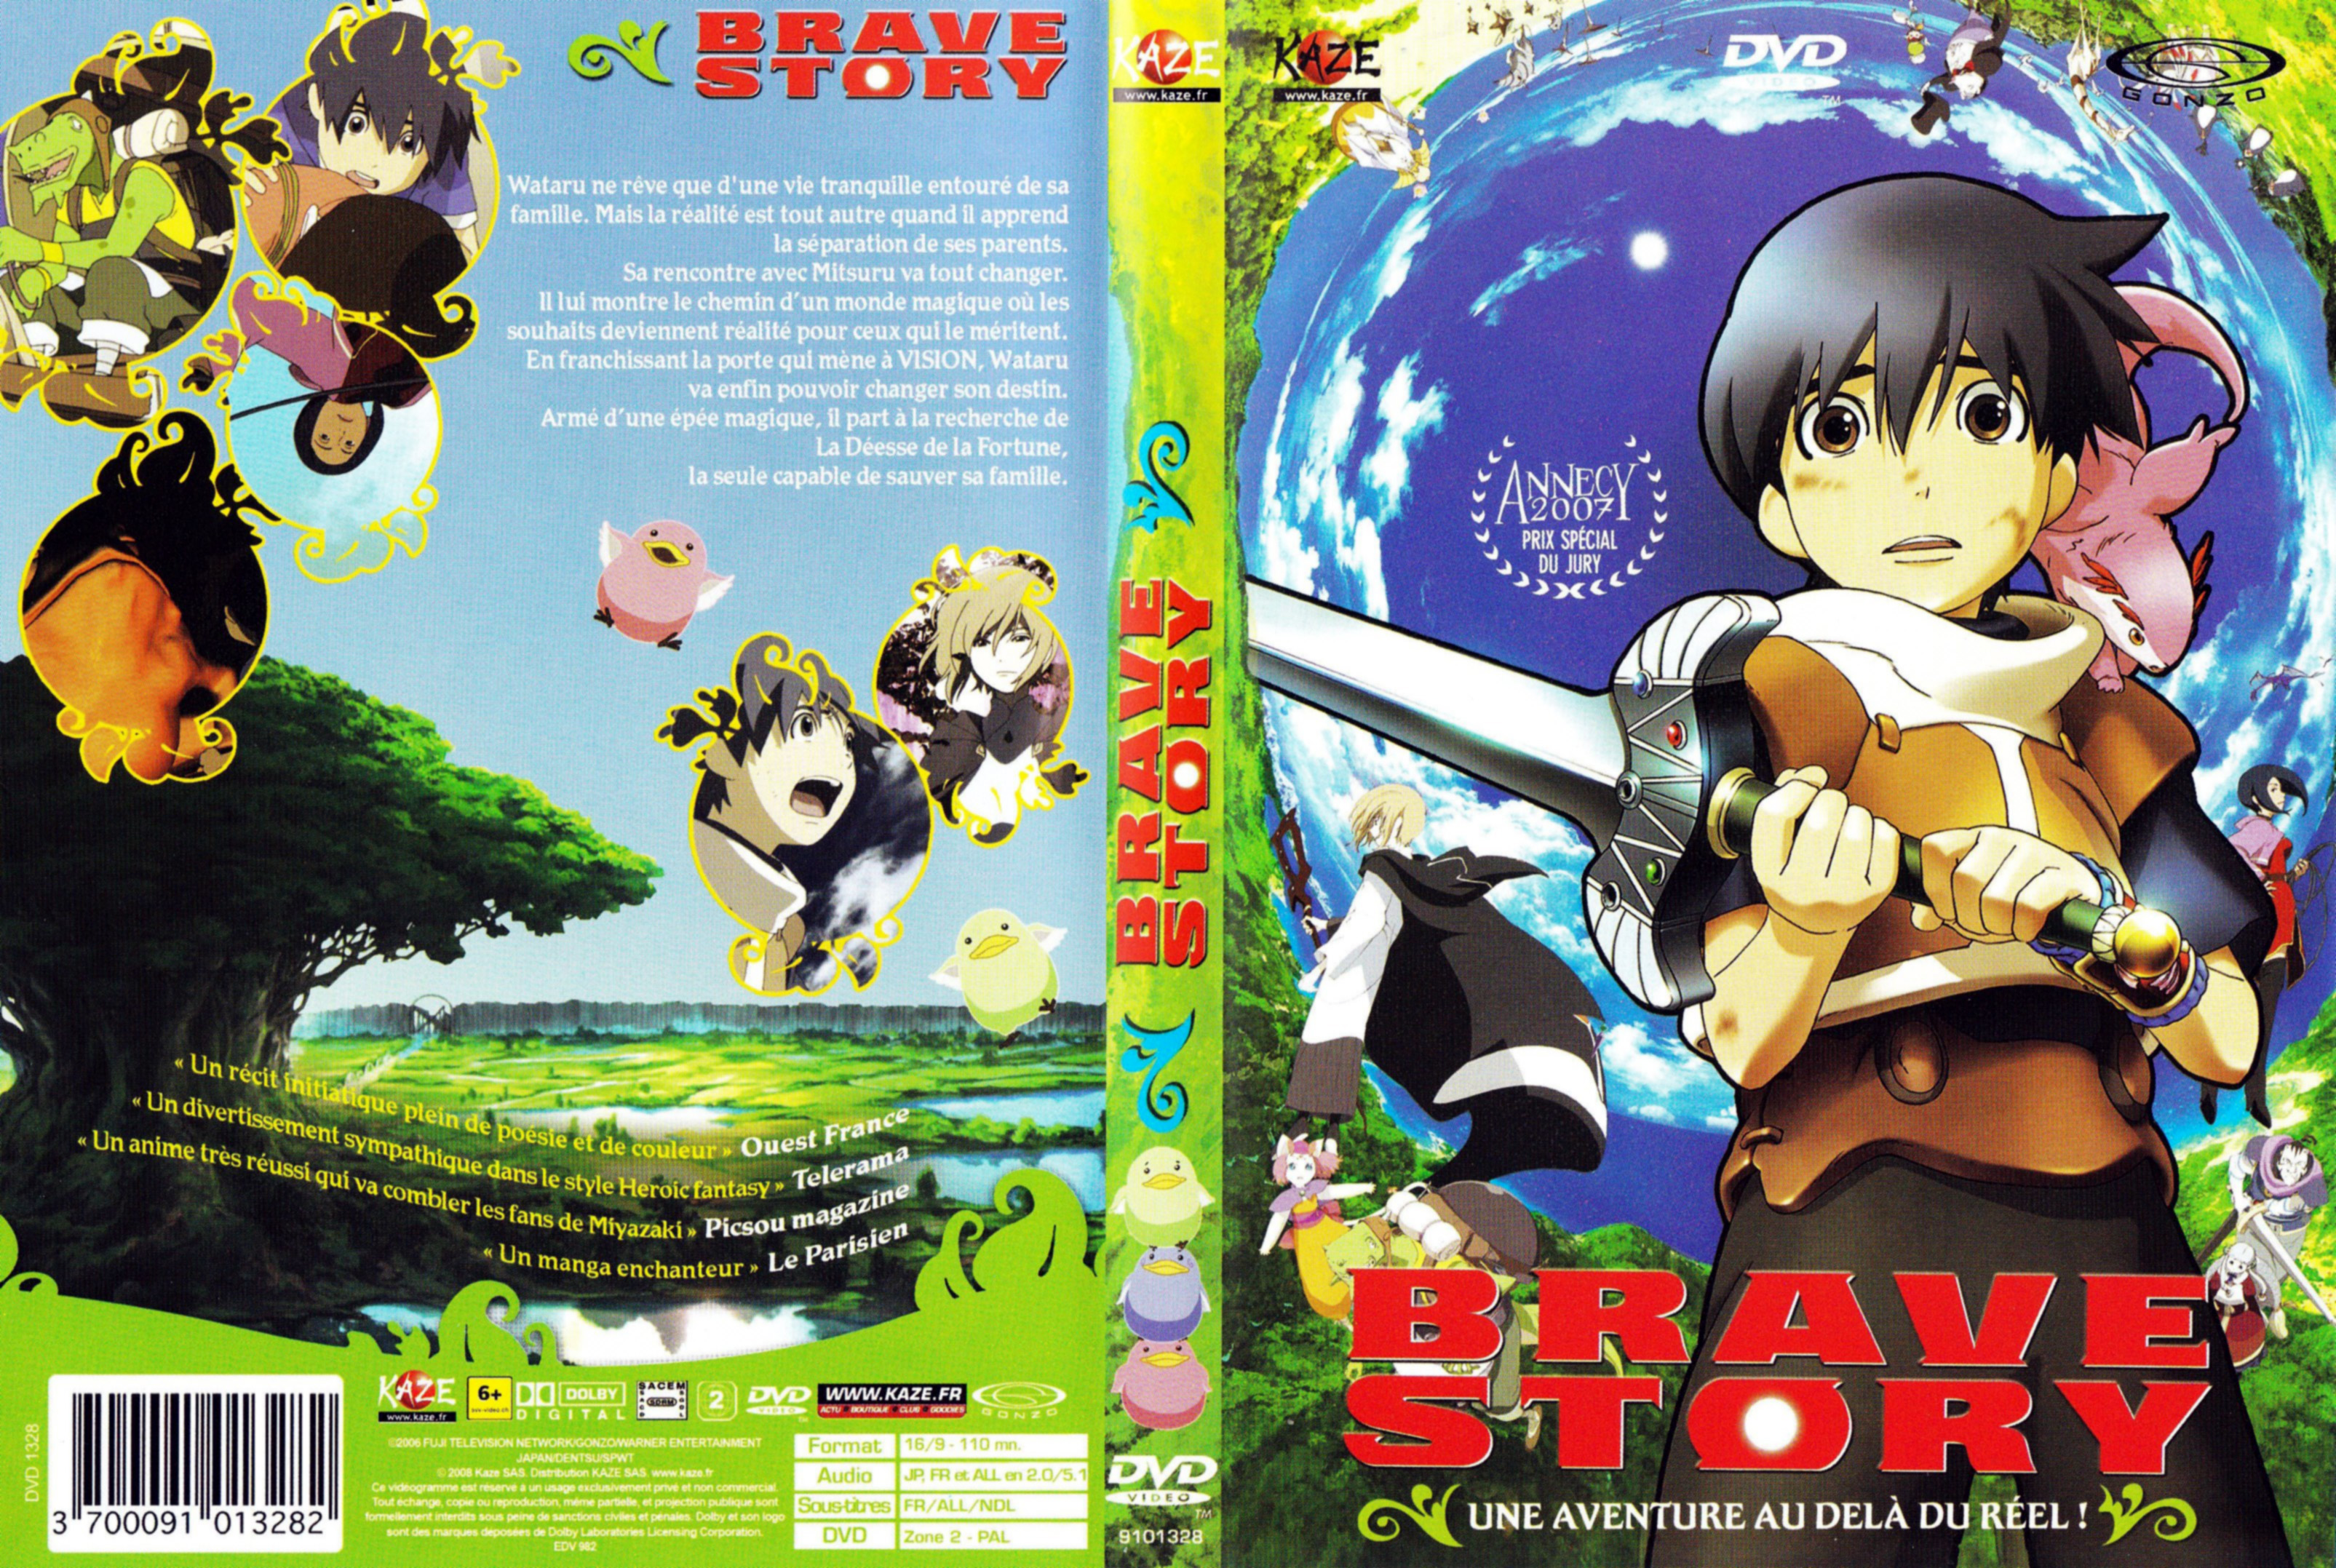 Jaquette DVD Brave story